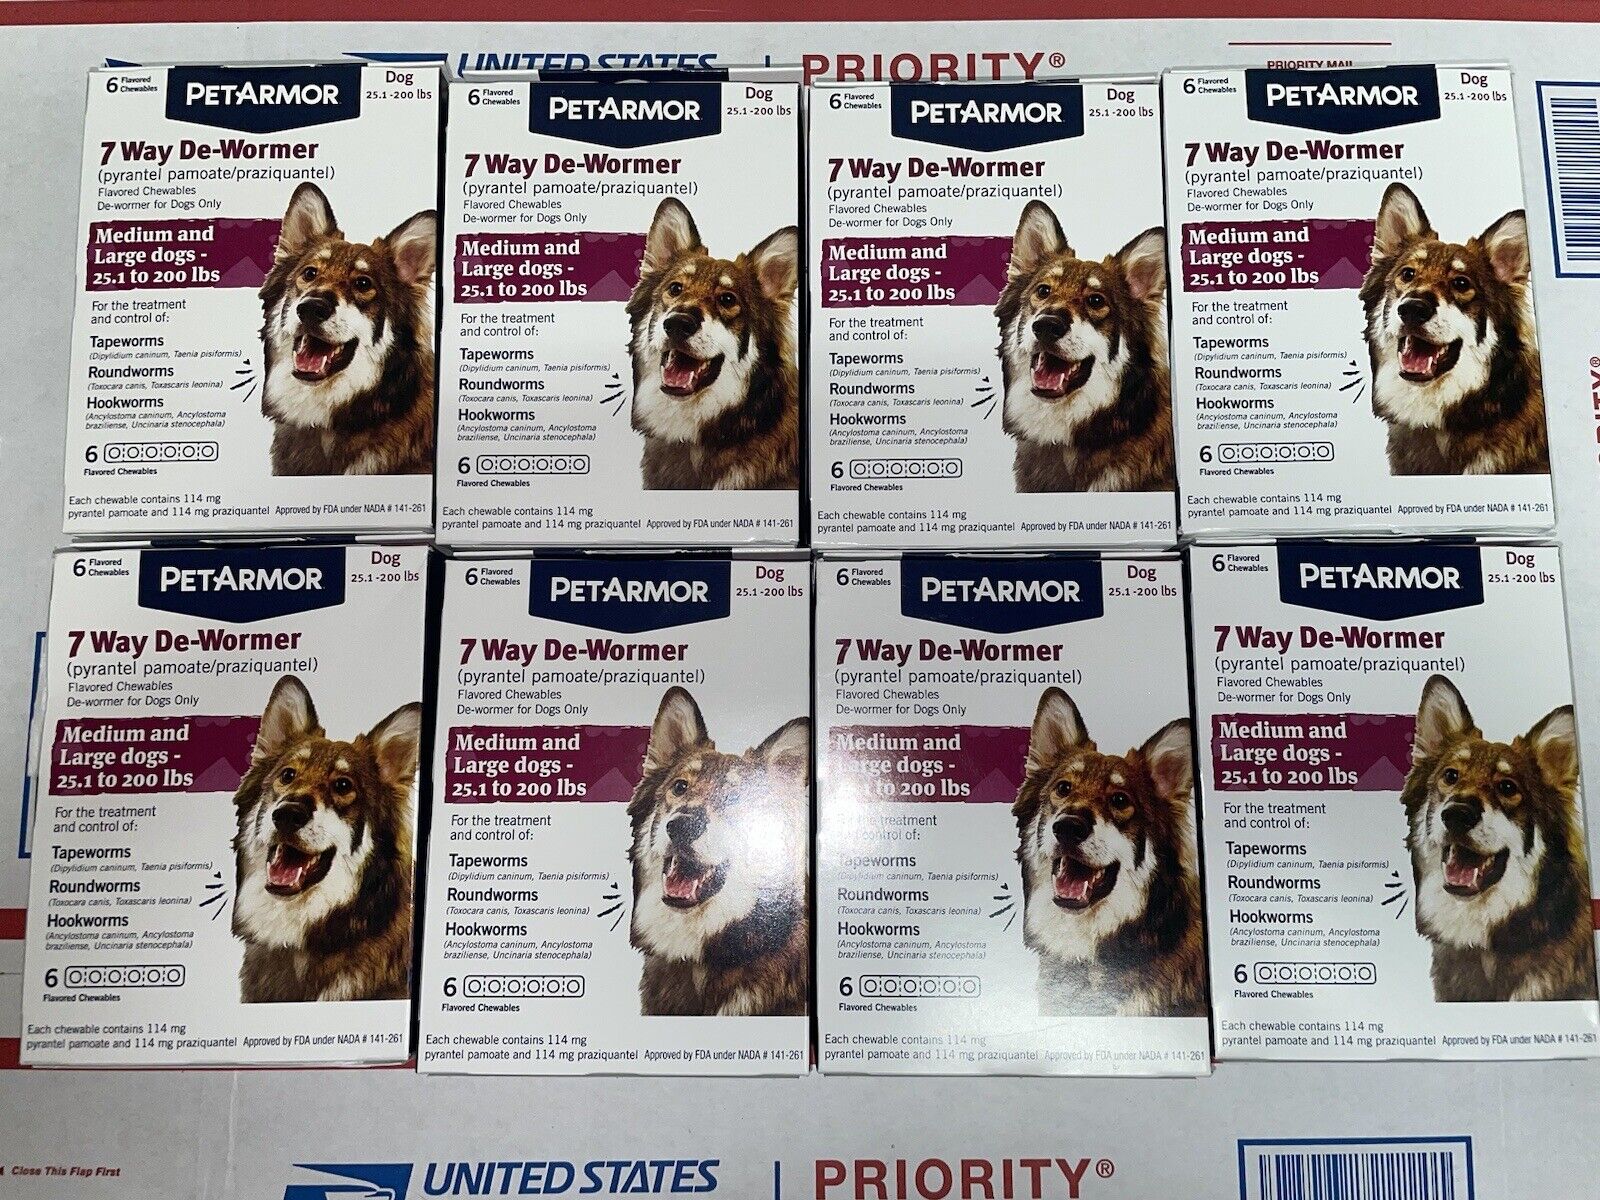 Lot Of 8 Pet Armor 7 Way De-Wormer Med/Large Dogs 48 Chewables BRAND NEW